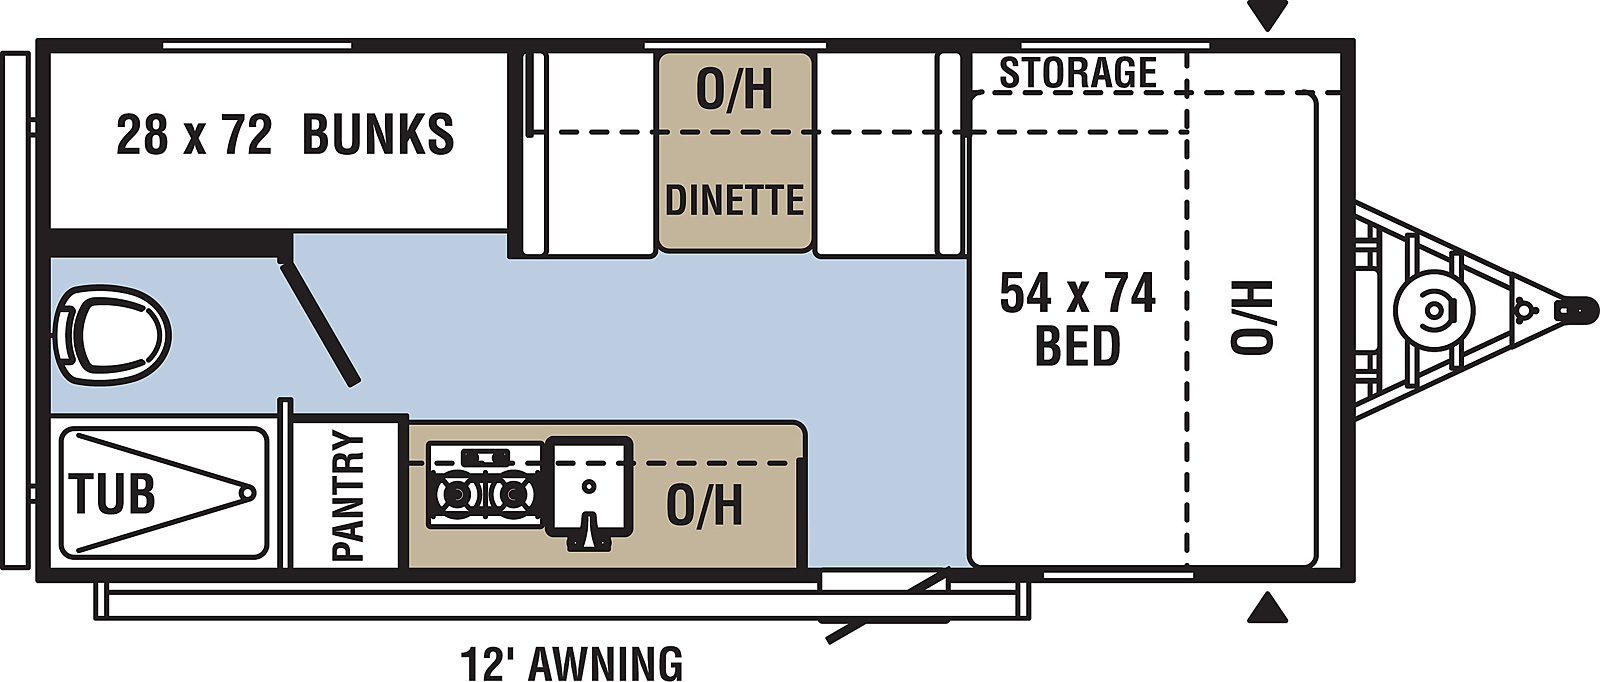 Clipper Ultra-Lite 17CBH floorplan. The 17CBH has no slide outs and one entry door.